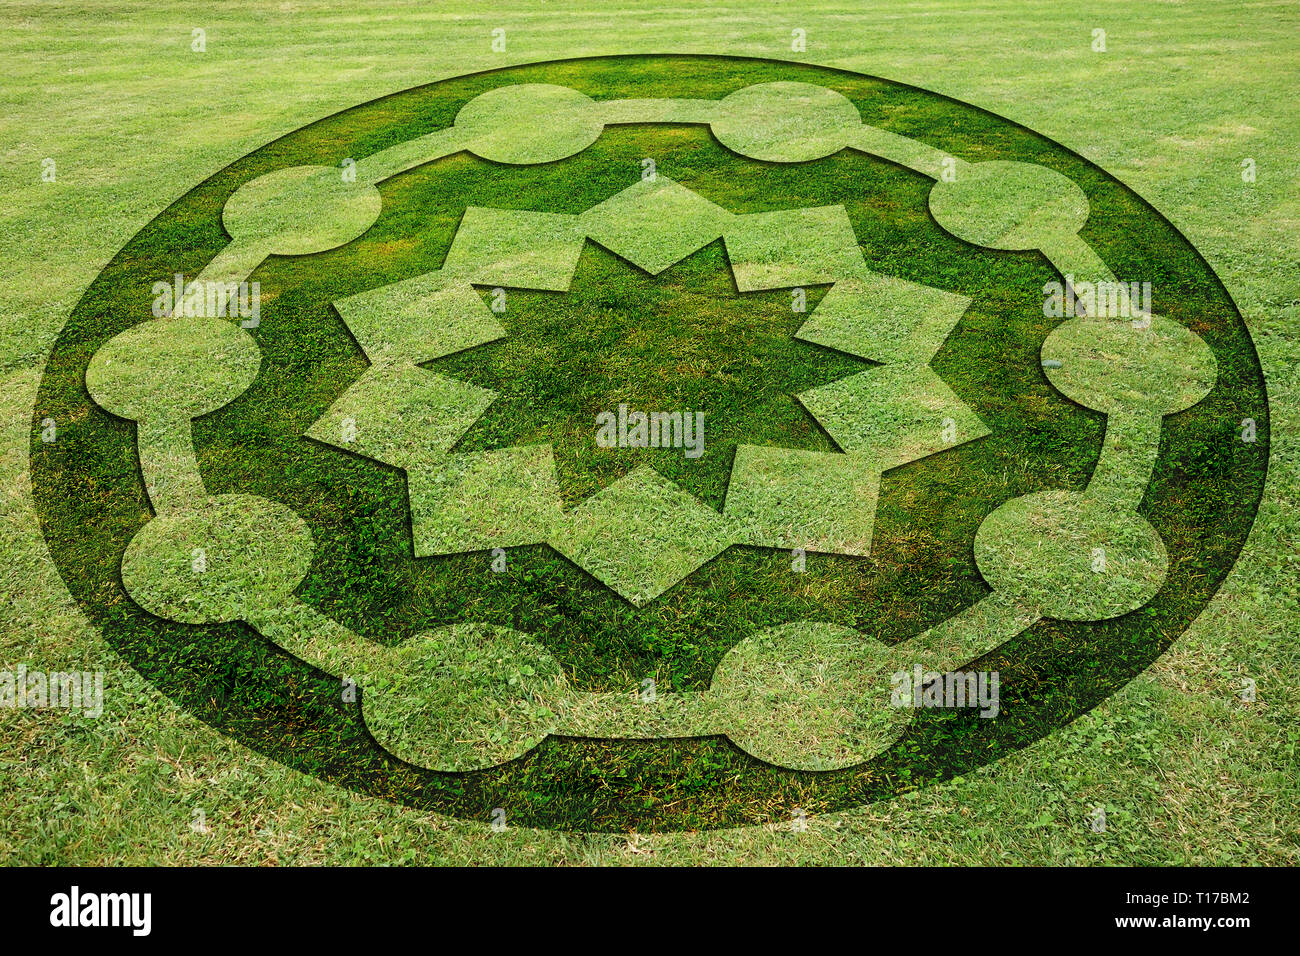 Concentric circles and stars symbols fake crop circle in the meadow Stock Photo